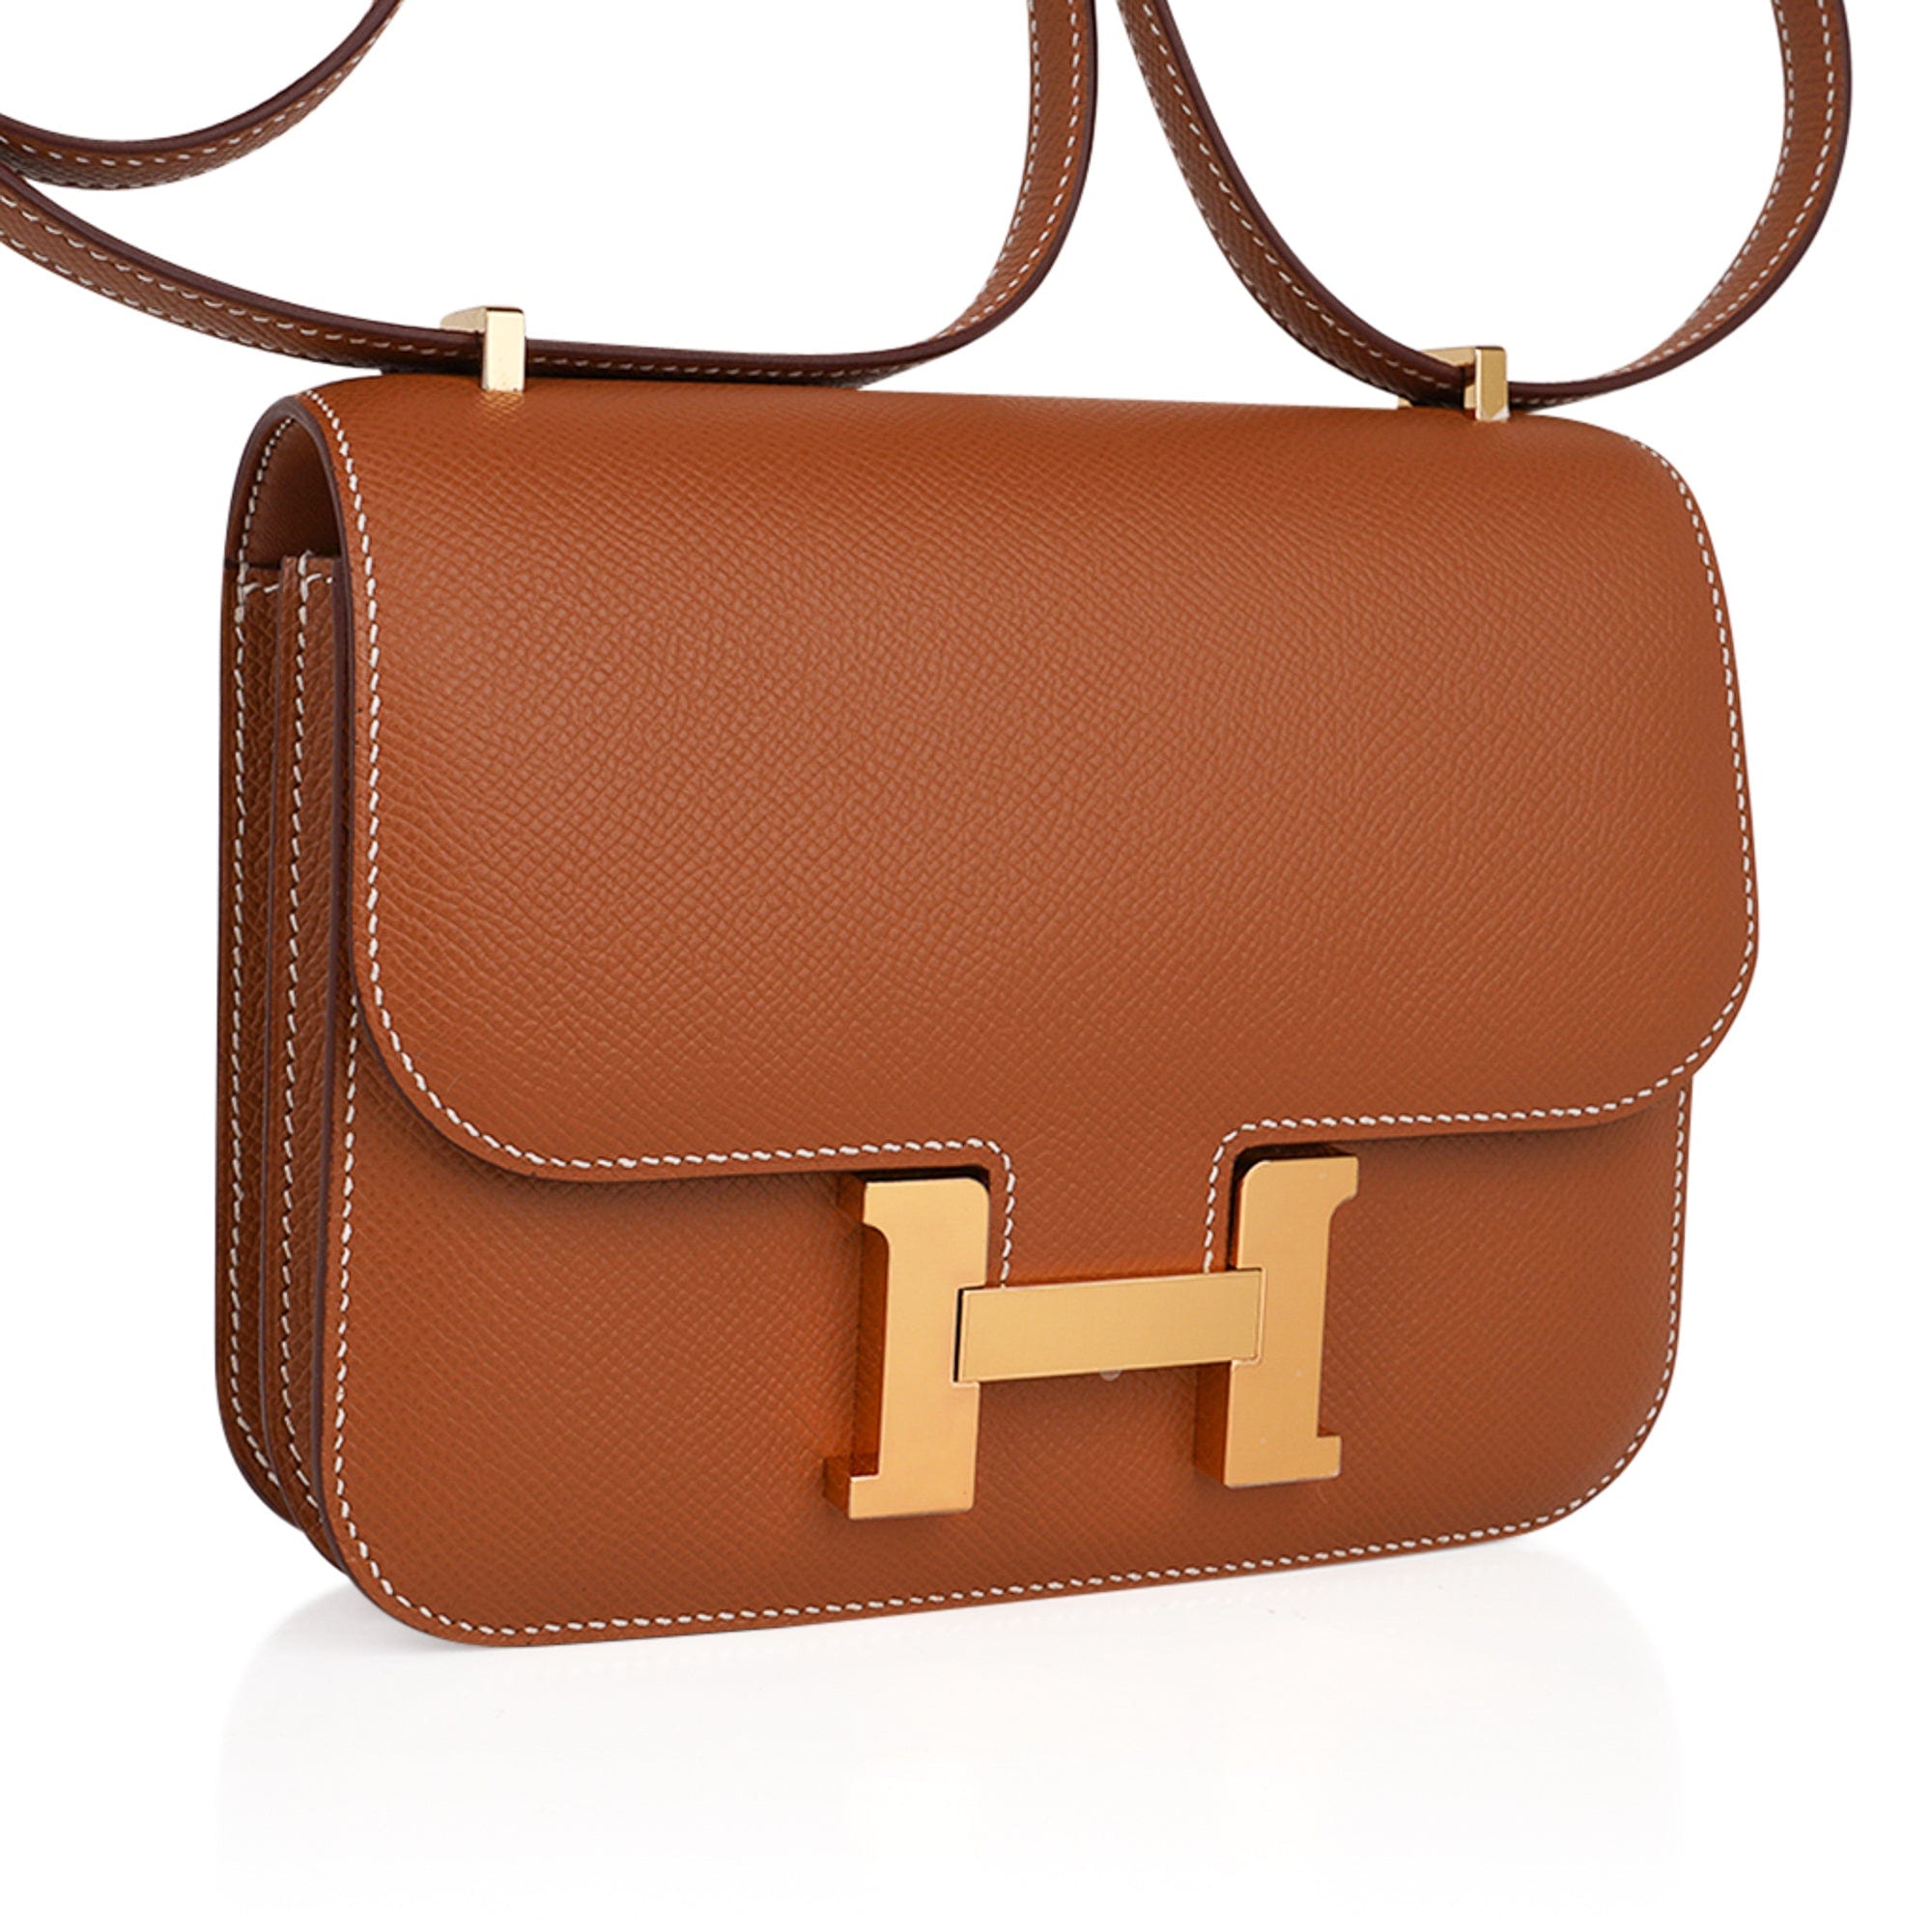 A BARÉNIA LEATHER MINI CONSTANCE 18 WITH GOLD HARDWARE